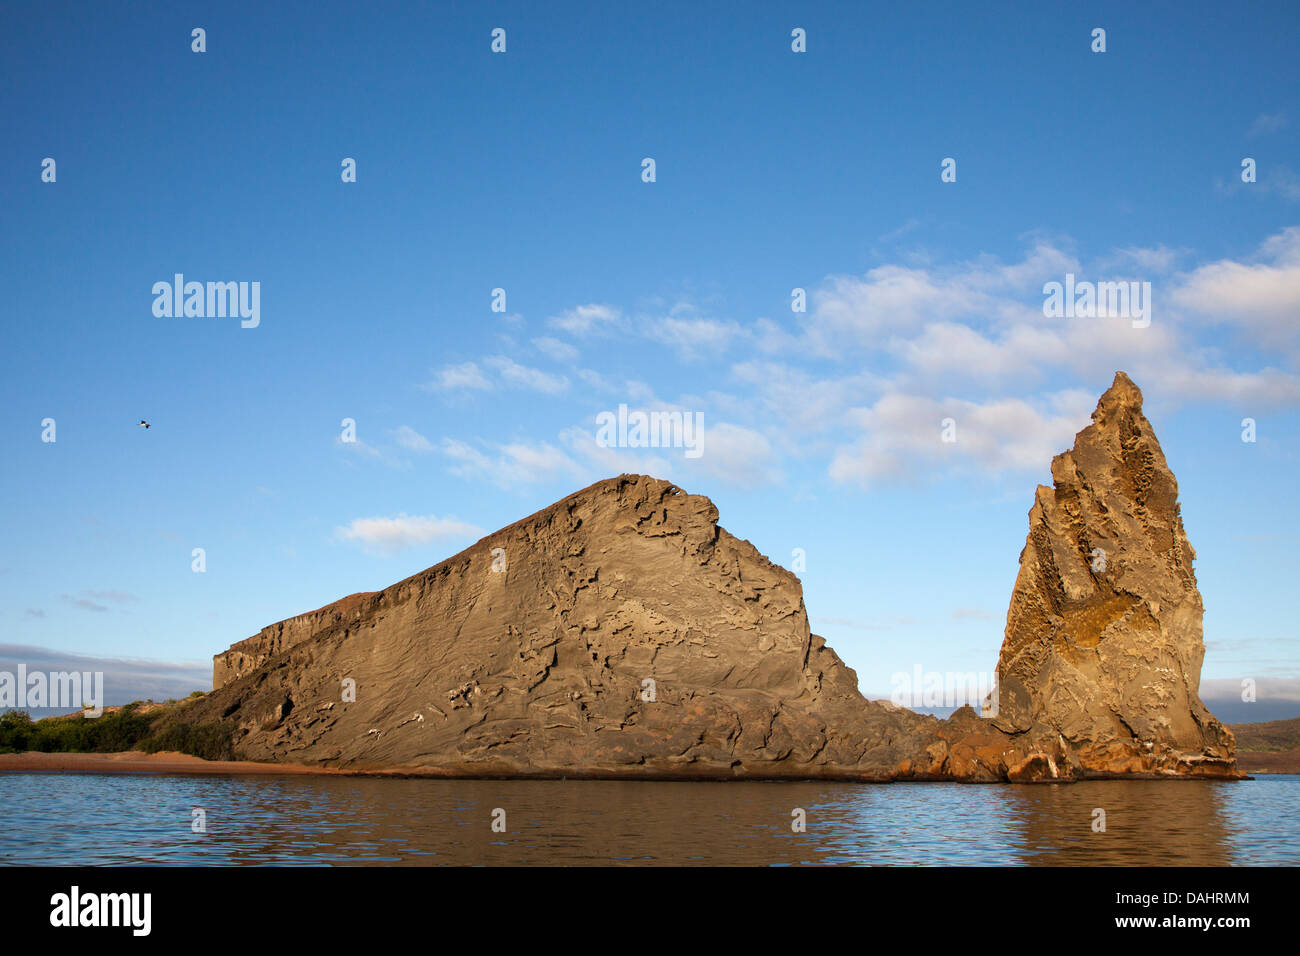 Pinnacle Rock on Bartolome Island, the remnant of an eroded volcanic tuff cone in the Galapagos Islands Stock Photo